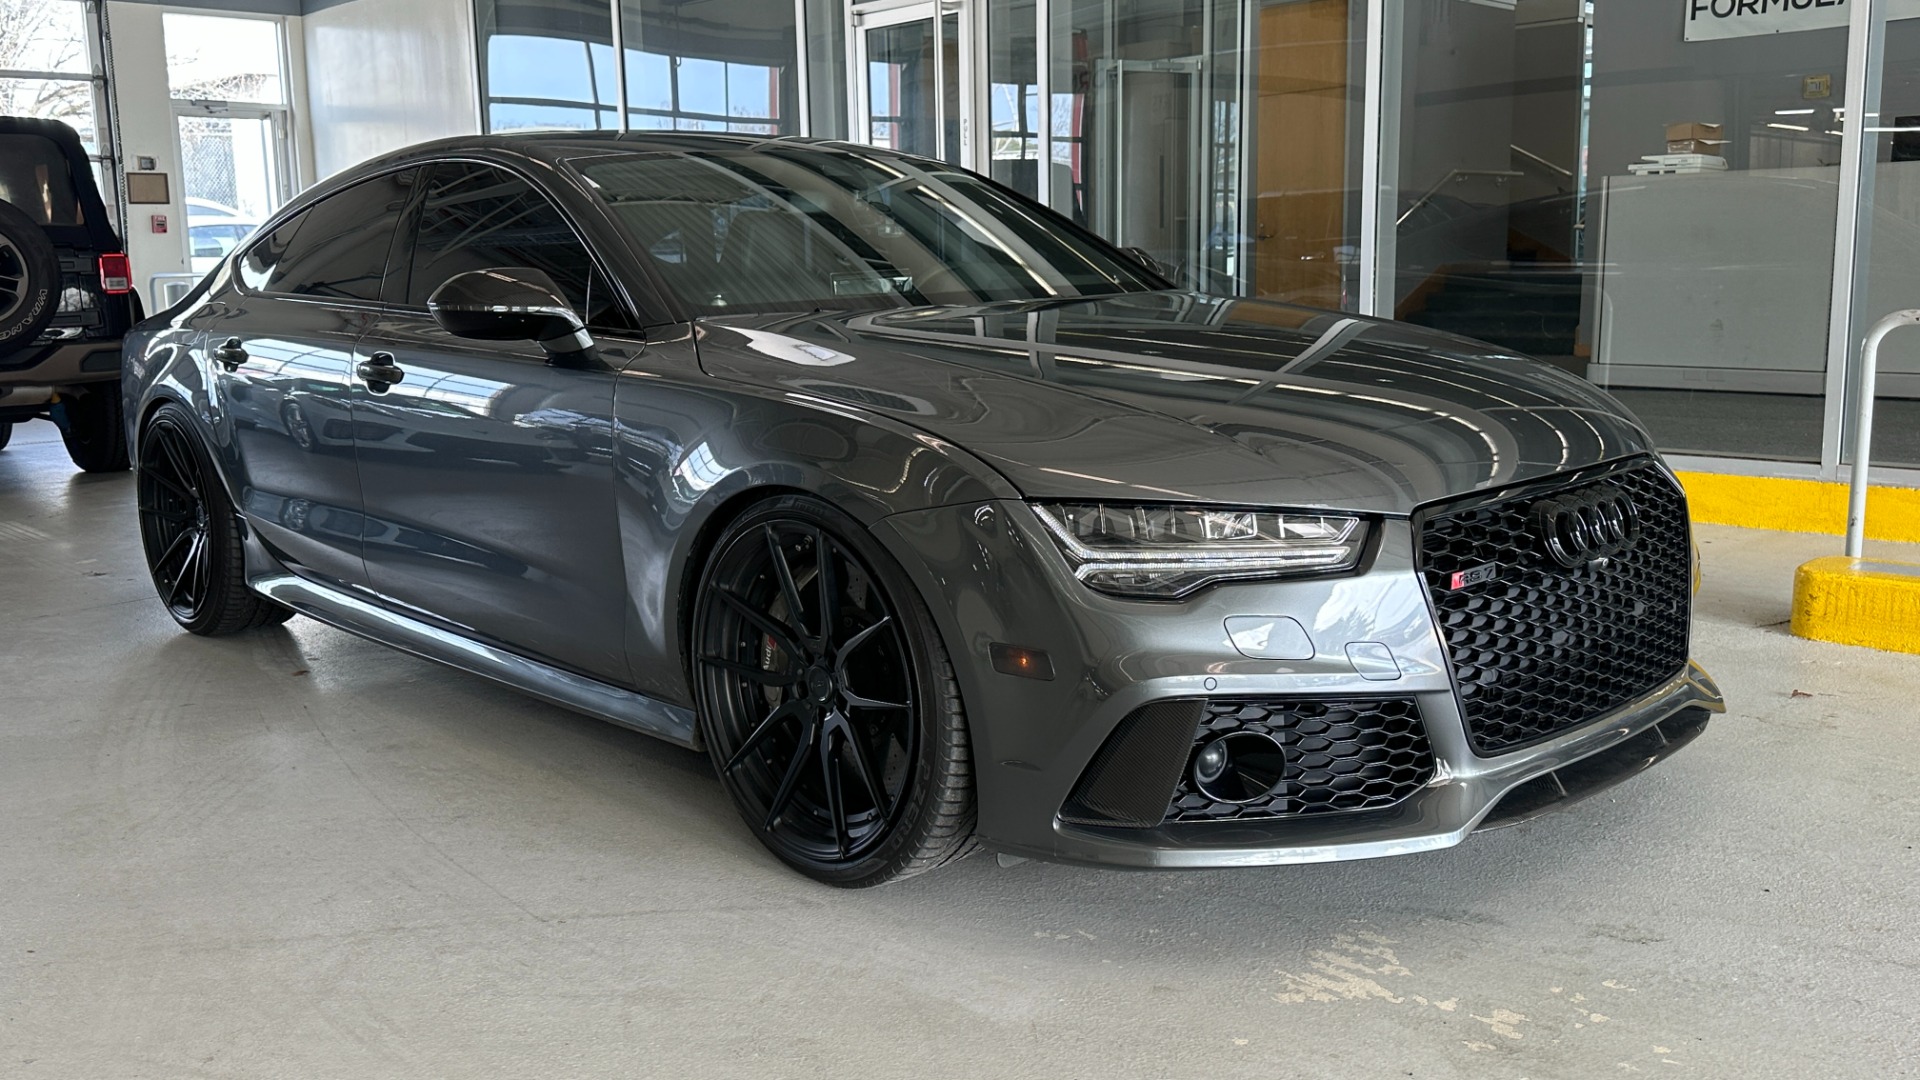 Used 2016 Audi RS 7 PERFORMANCE PRESTIGE / ADV1 WHEELS / EXHAUST / CARBON FIBER for sale Sold at Formula Imports in Charlotte NC 28227 2